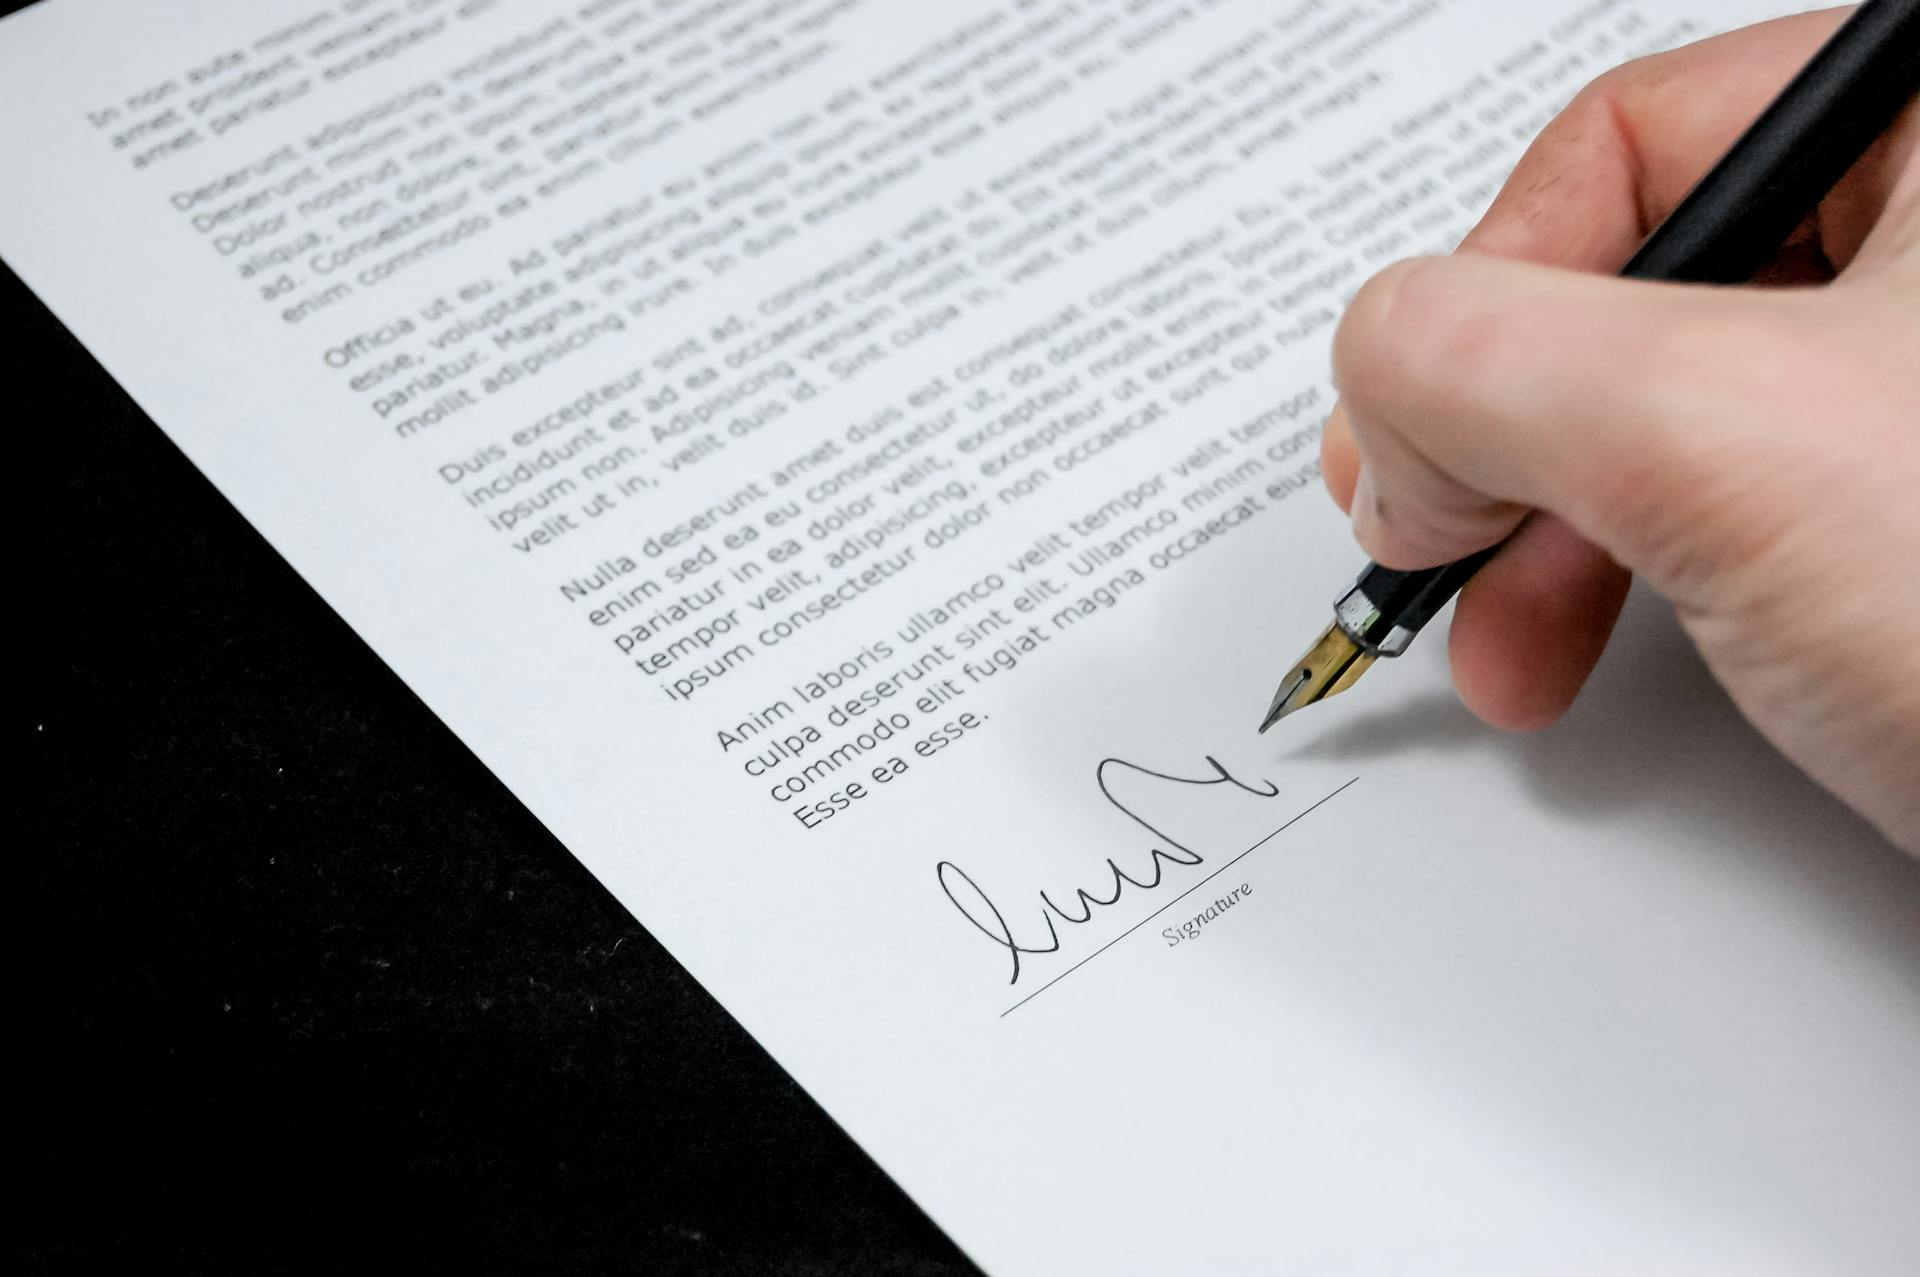 A person signing paperwork | Source: Pexels